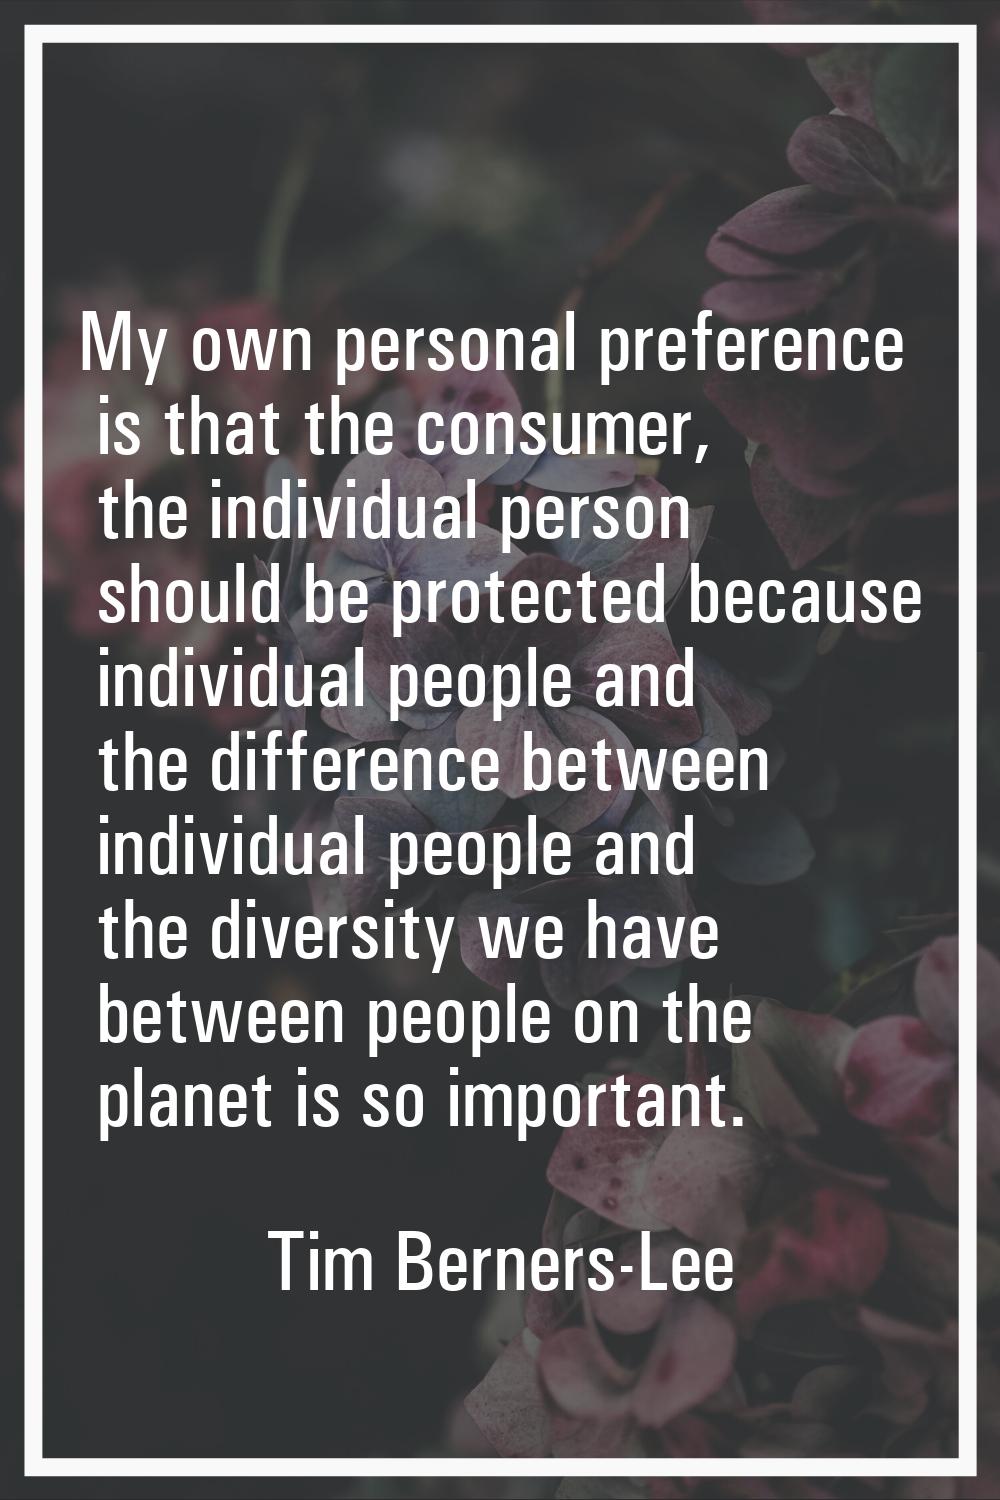 My own personal preference is that the consumer, the individual person should be protected because 